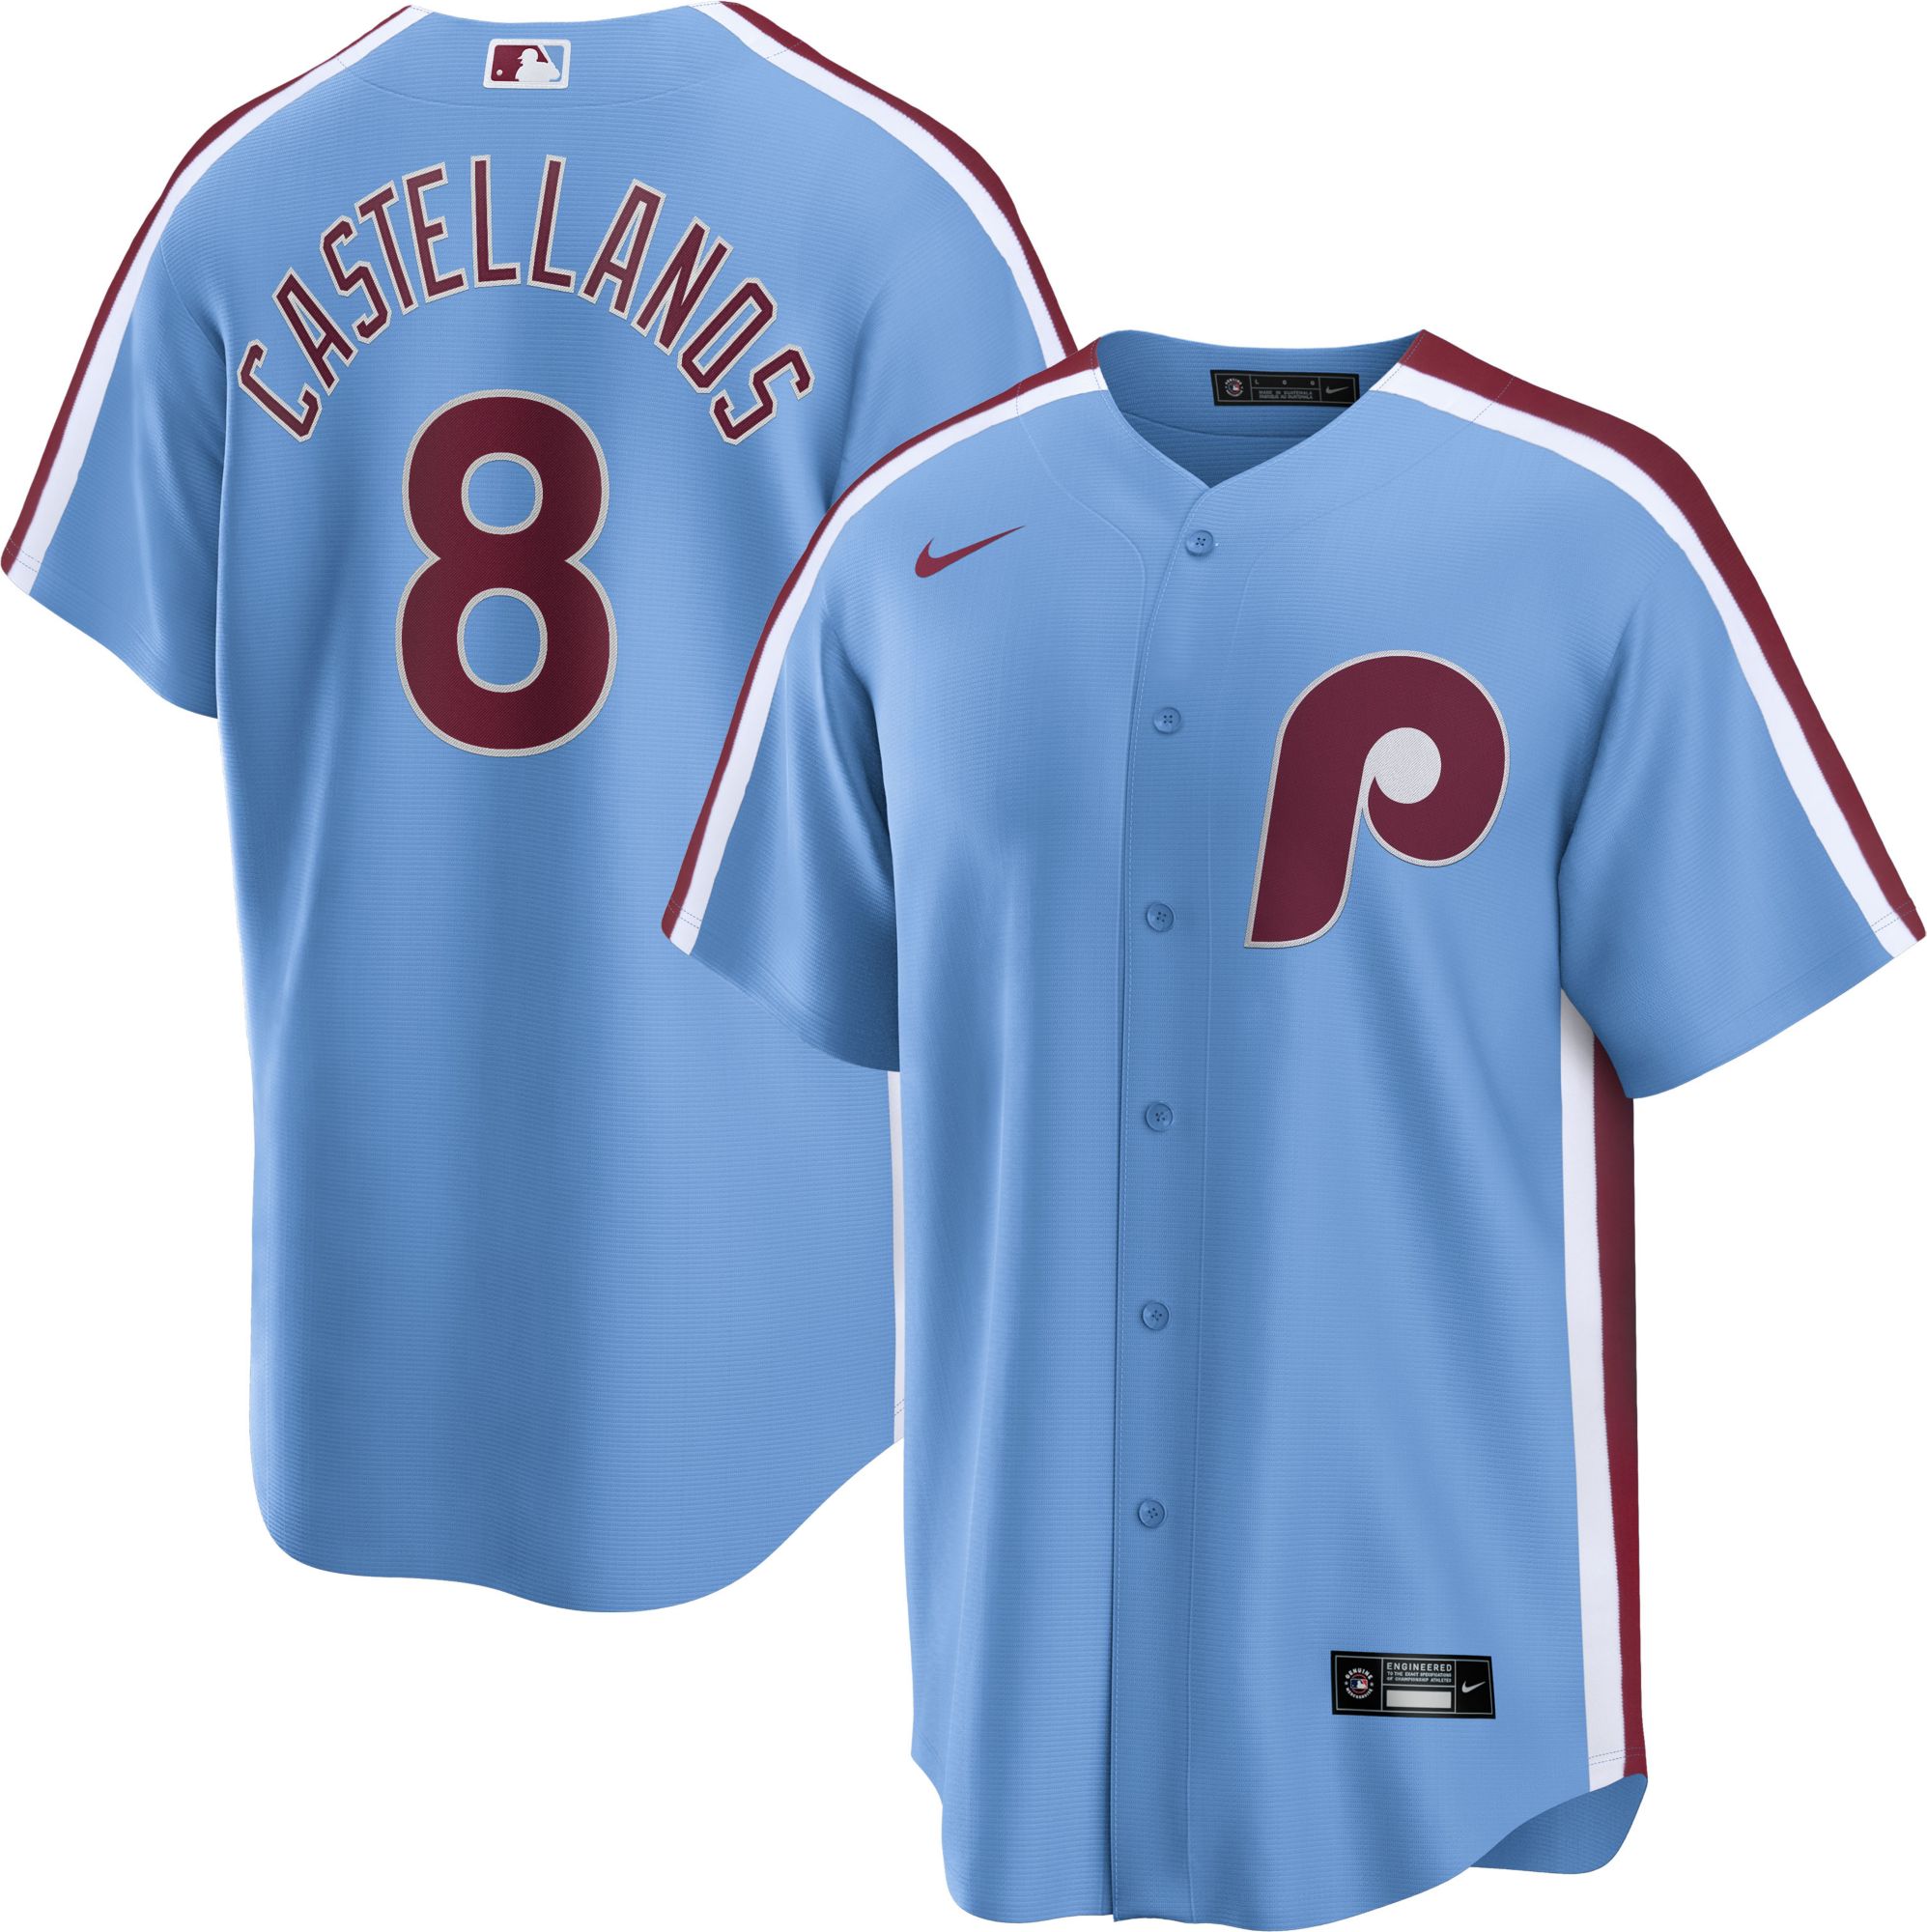 Phillies cool base jersey